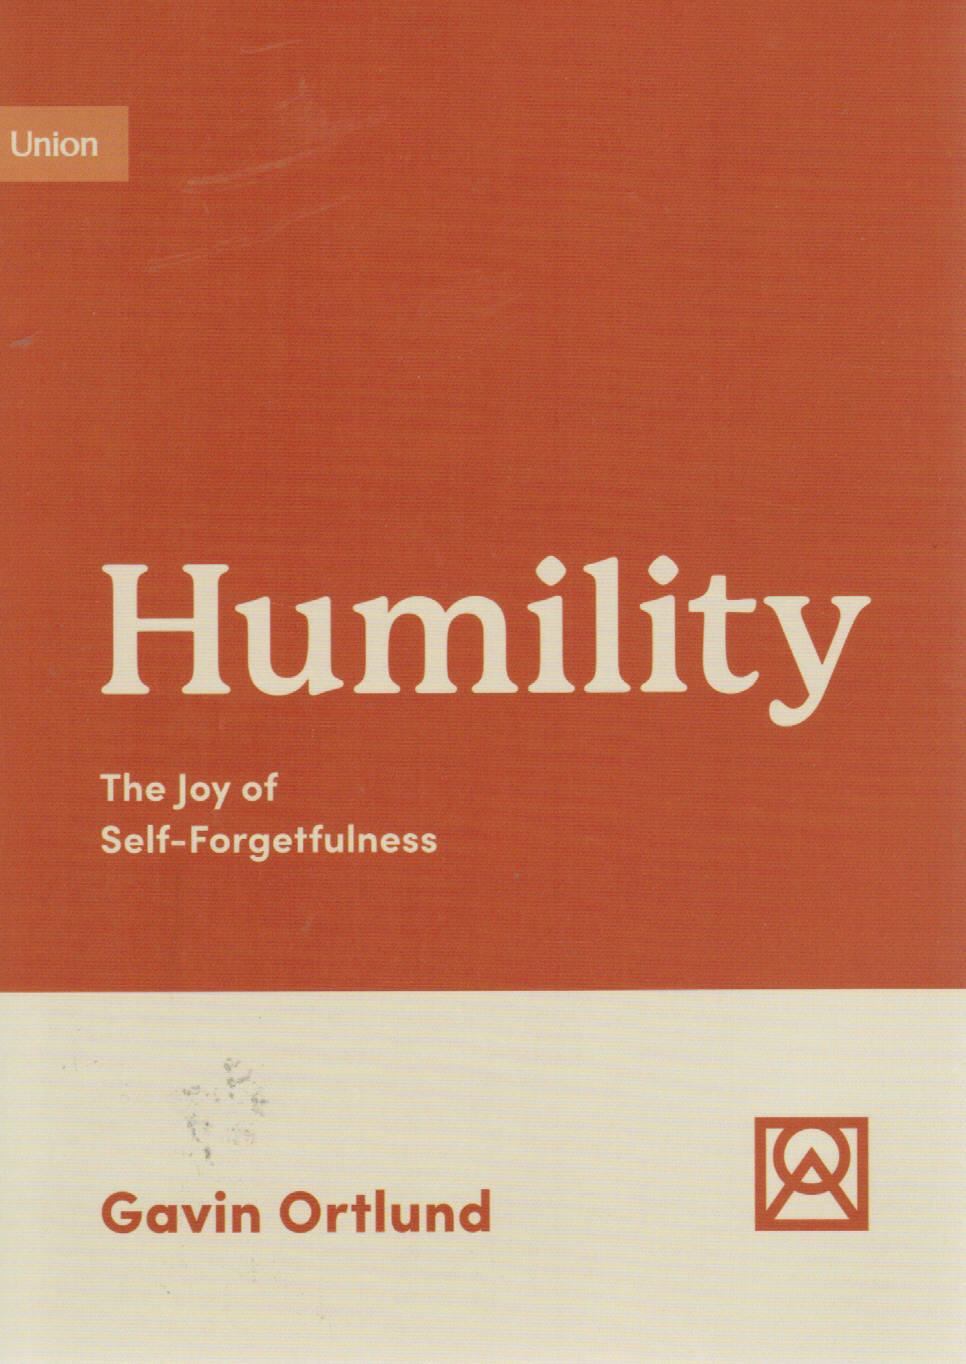 Growing Gospel Integrity - Humility: The Joy of Self-Forgetfulness